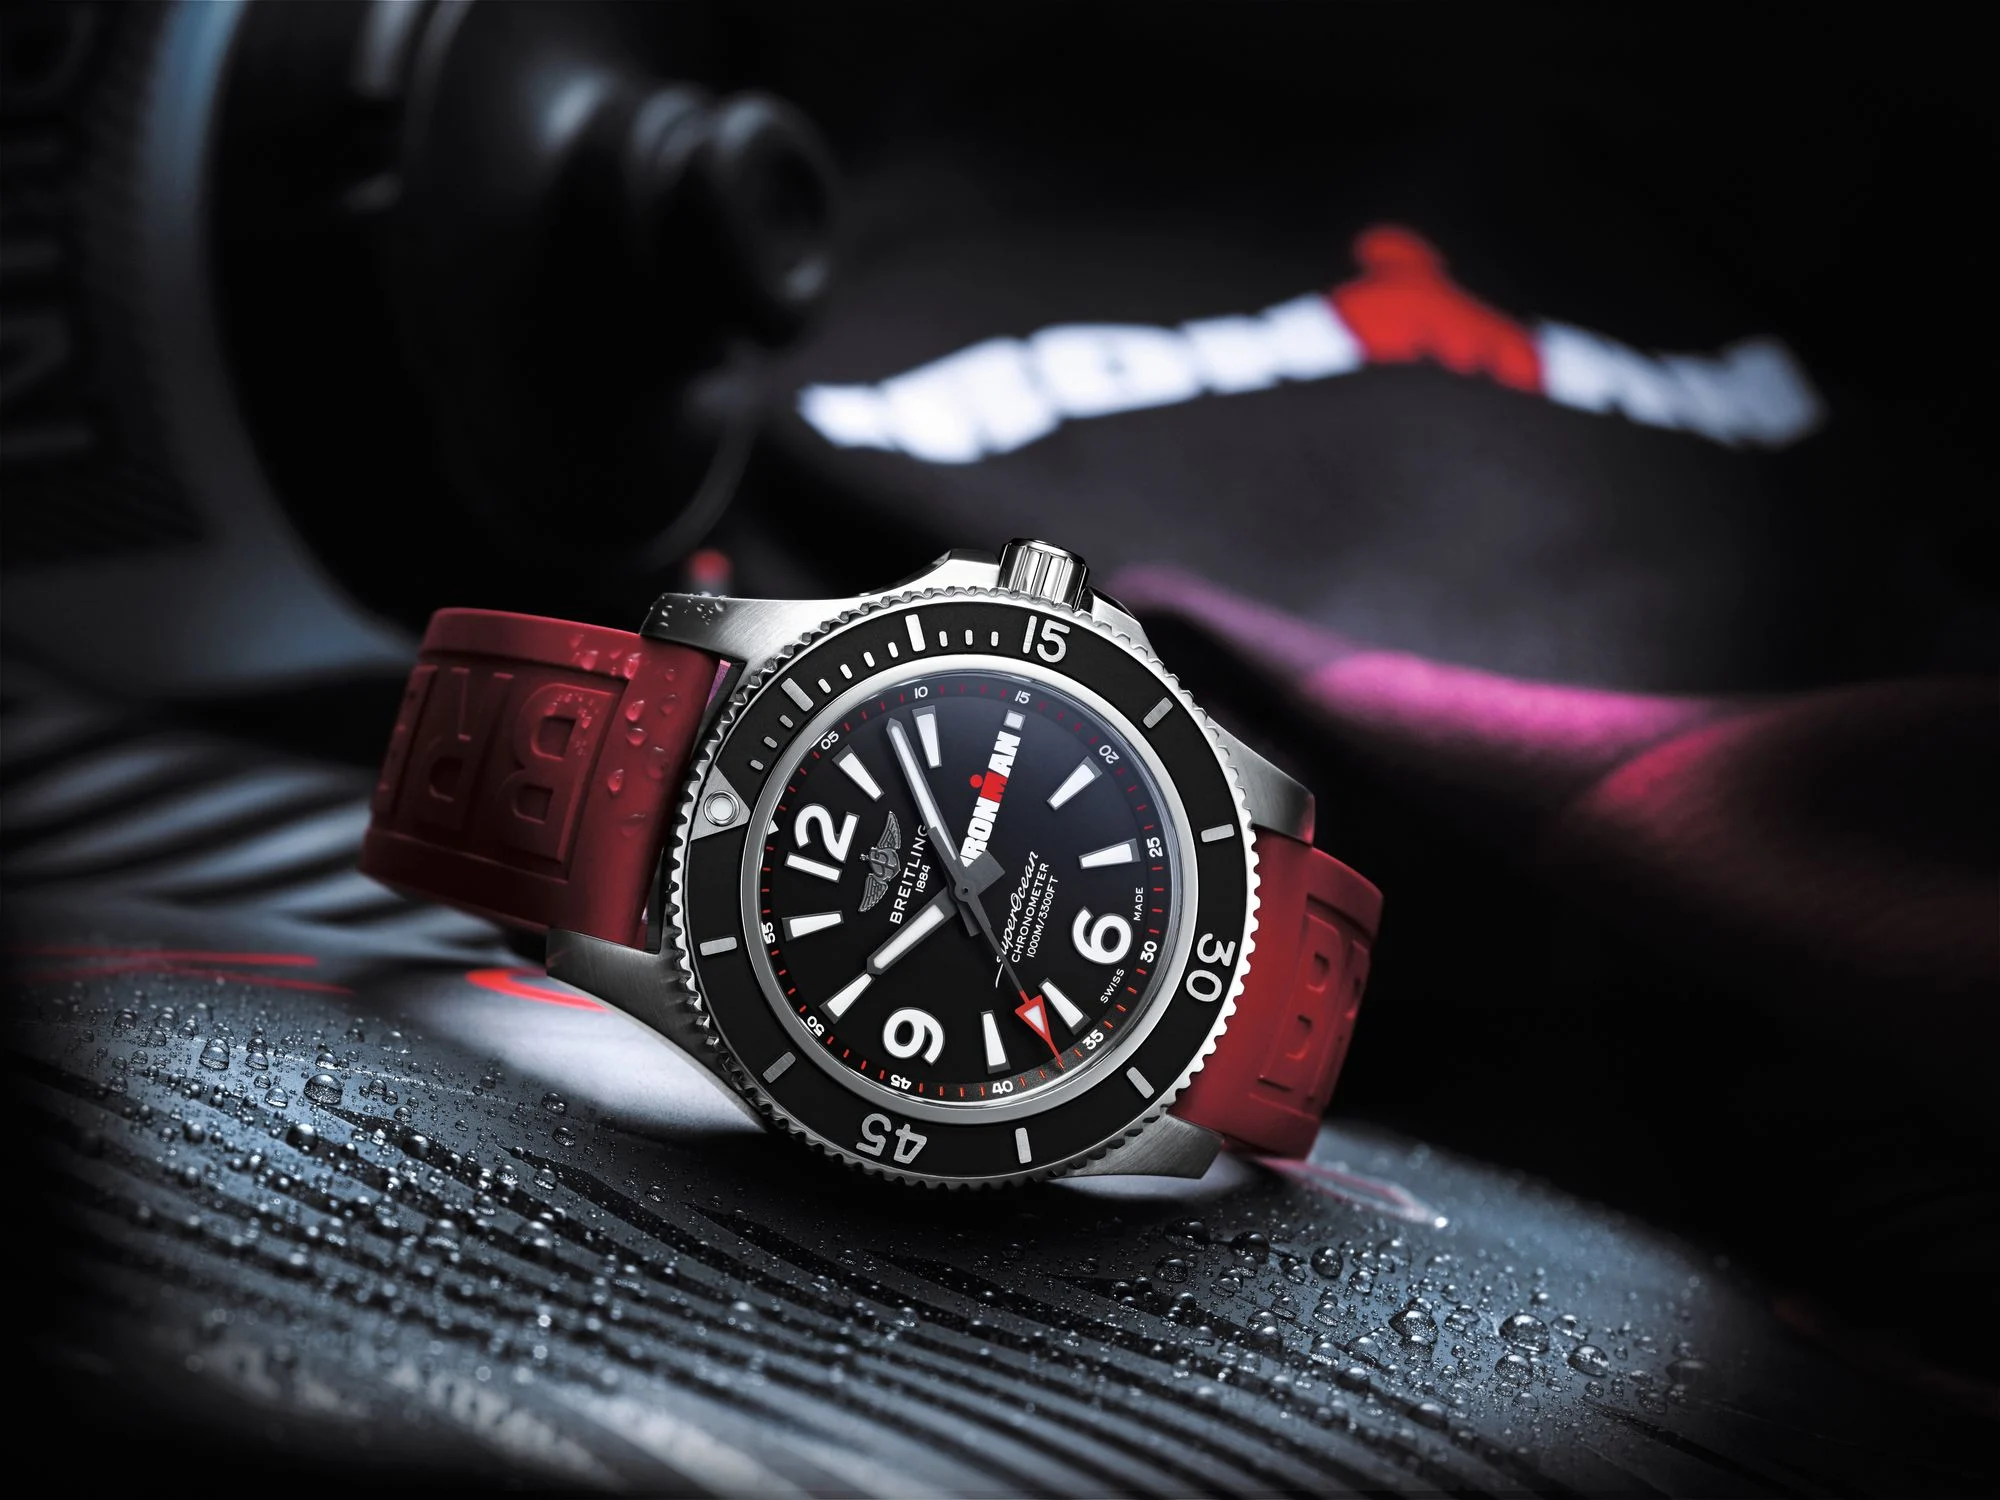 Breitling Superocean Automatic 44 IronMan Limited Edition